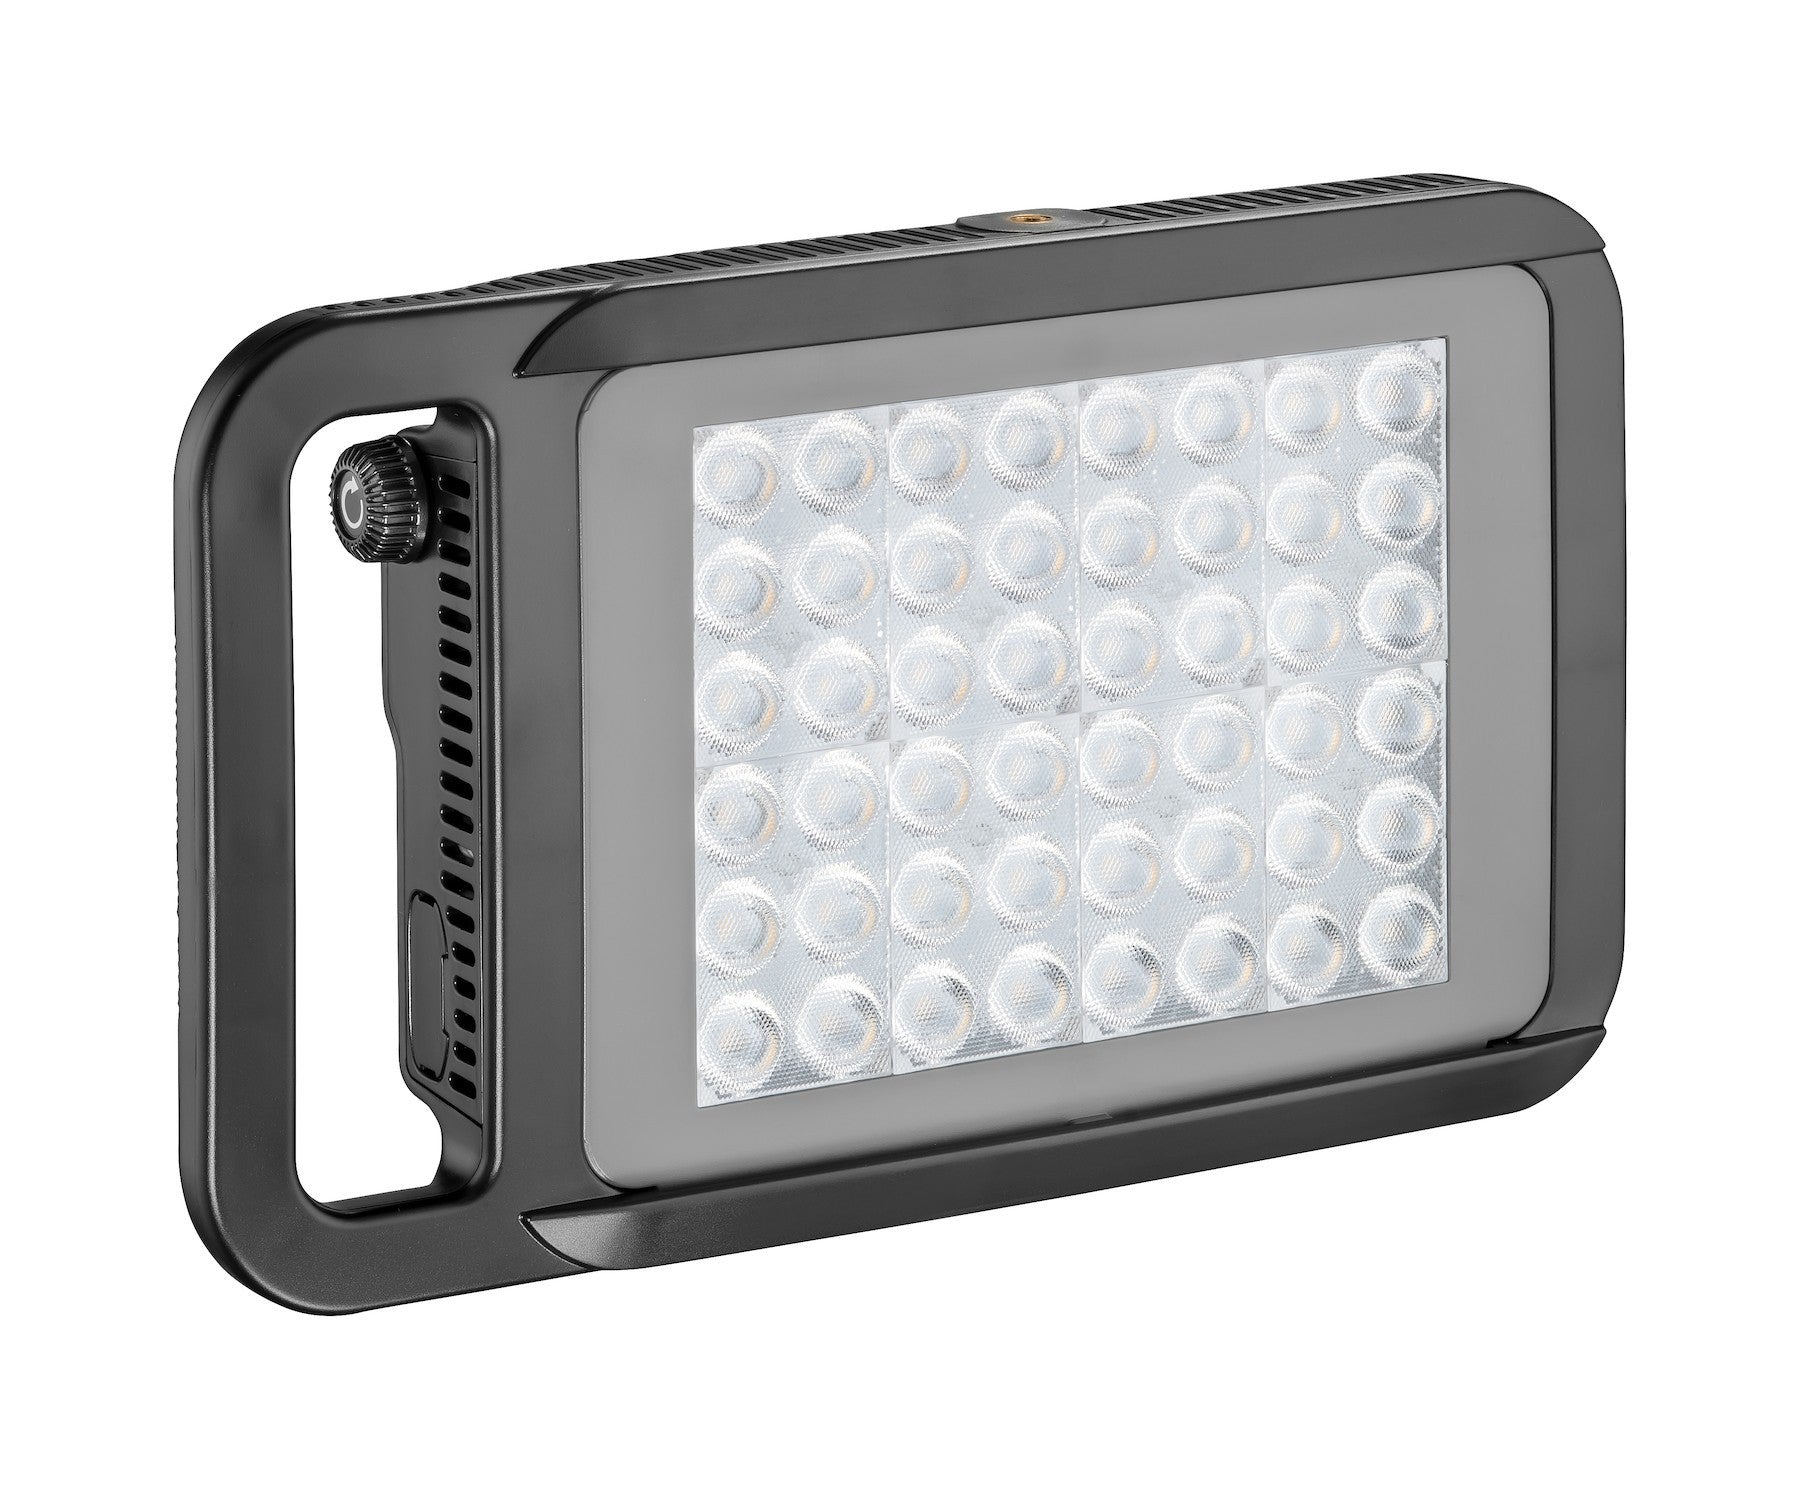 Manfrotto LYKOS LED Light, lighting led lights, Manfrotto - Pictureline  - 1